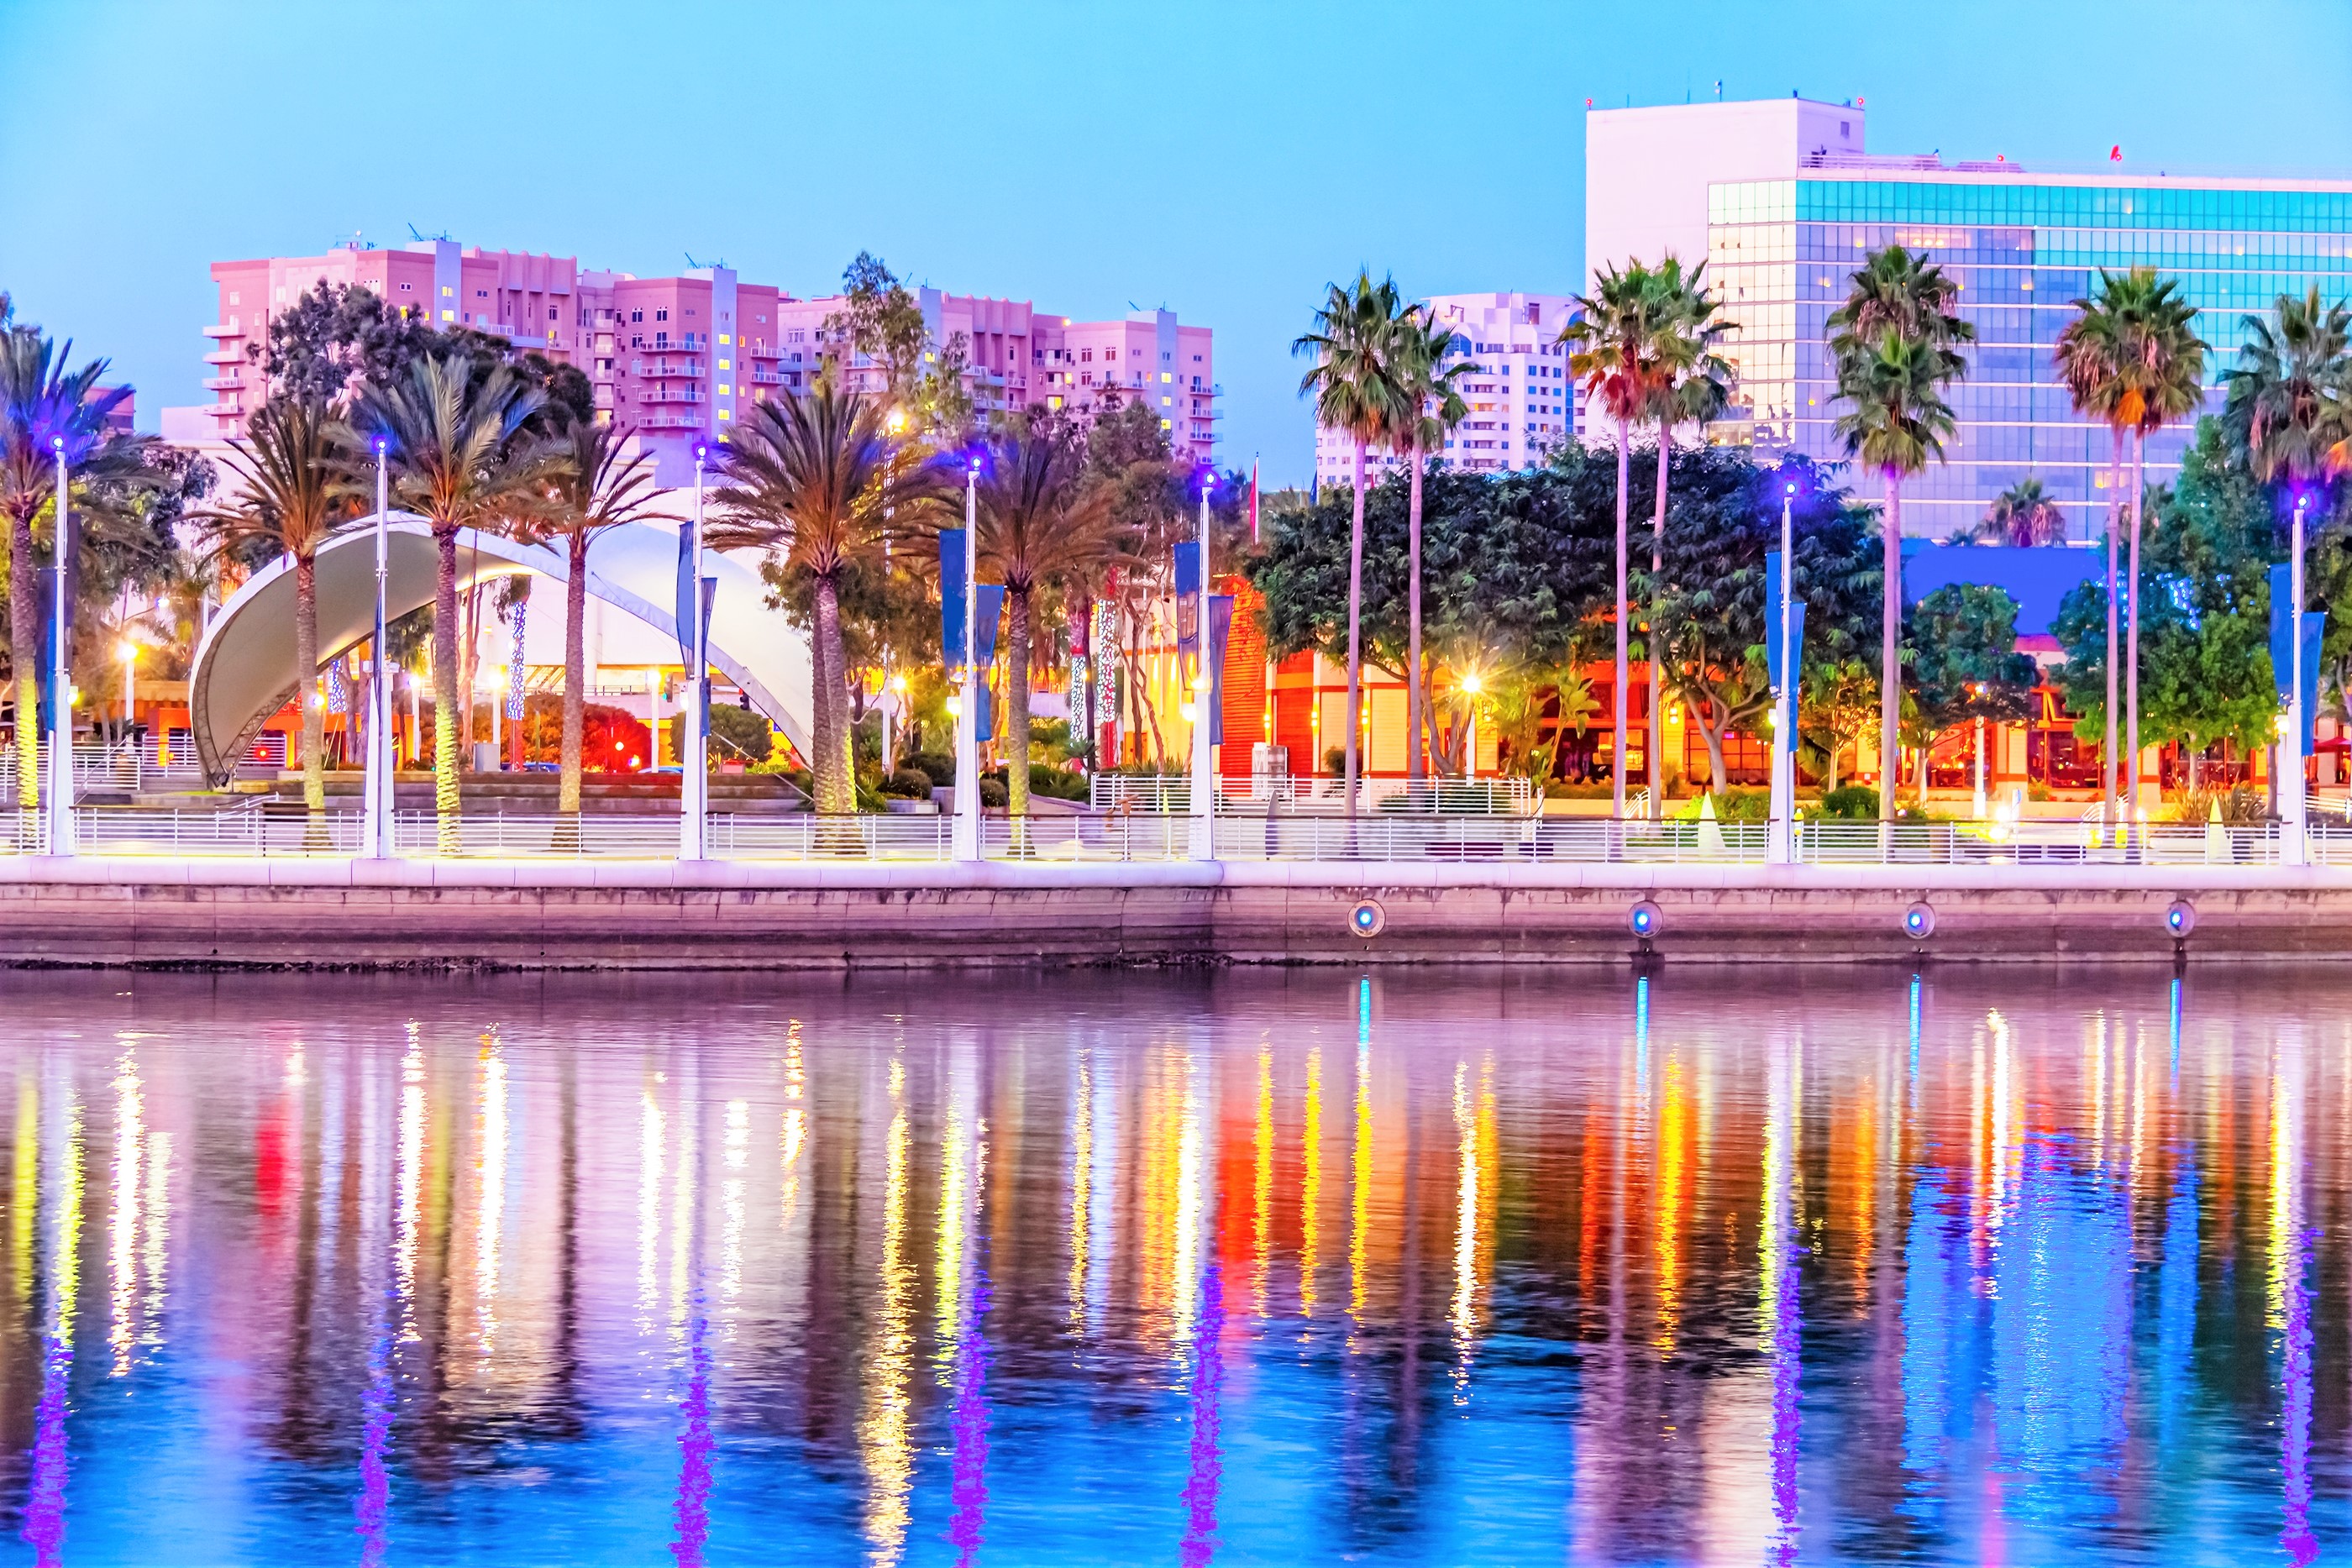 Long Beach, California skyline is reflected in the still water